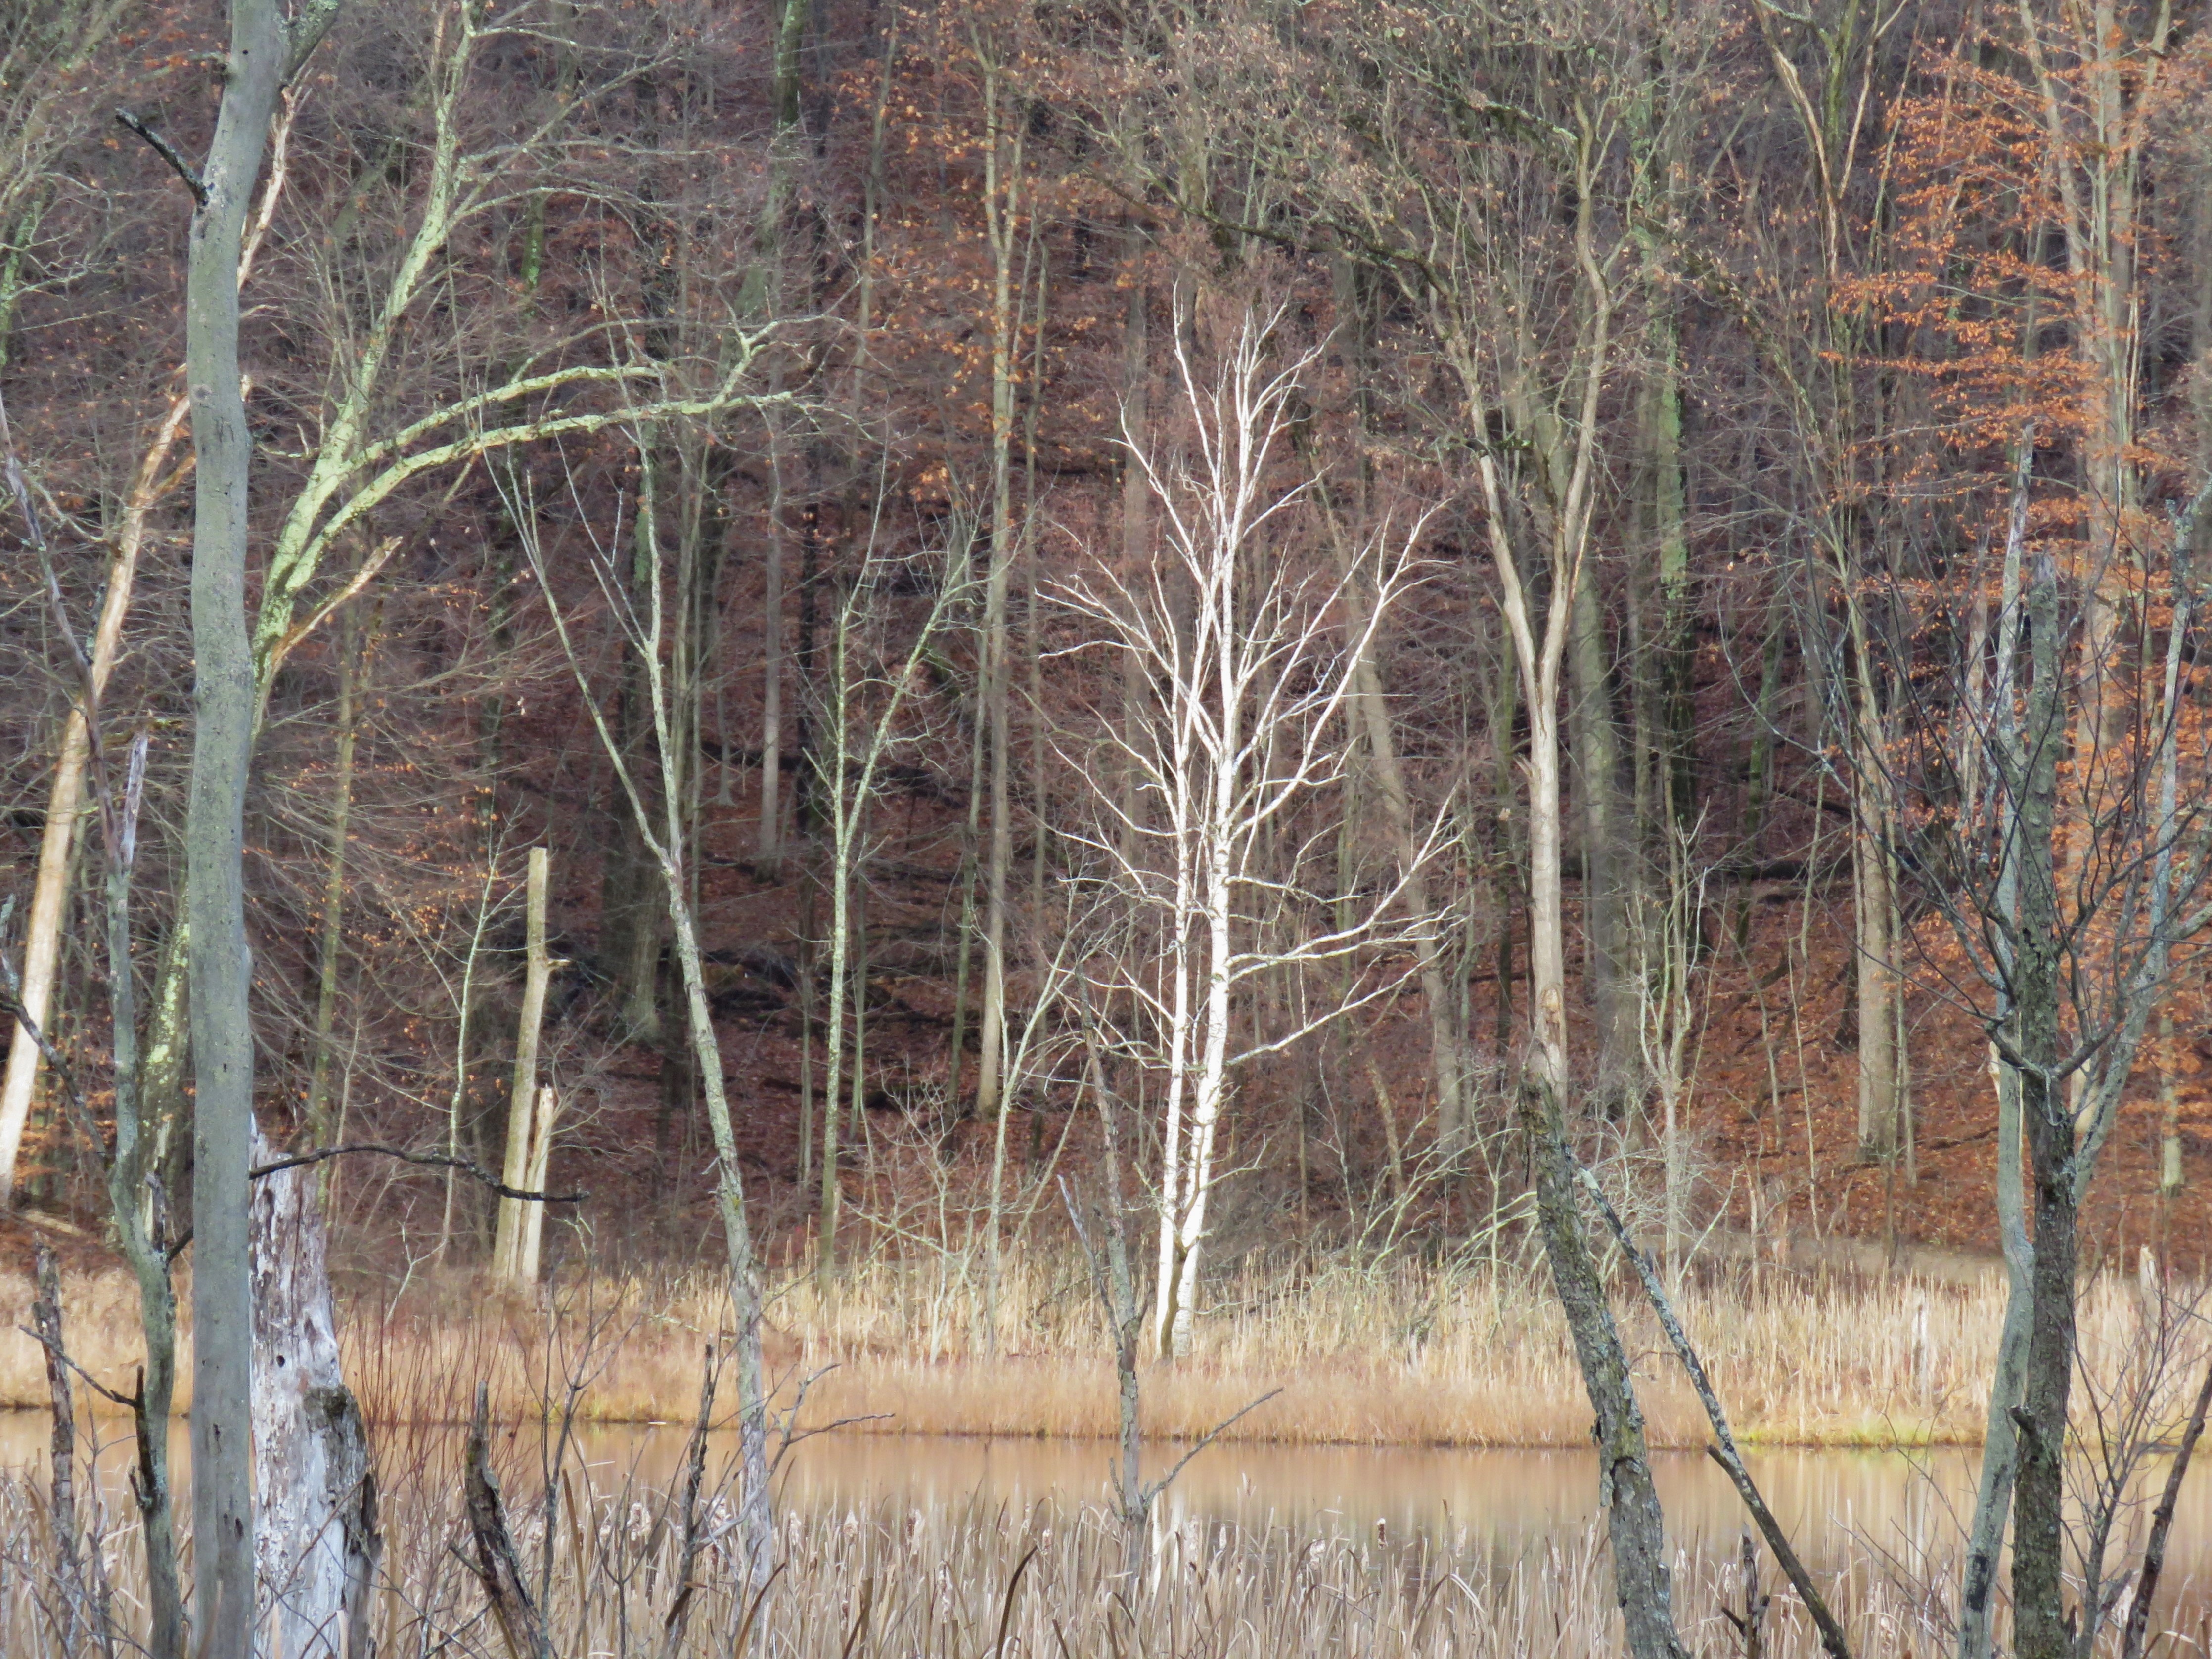 A view of trees in the fall from across the lake 